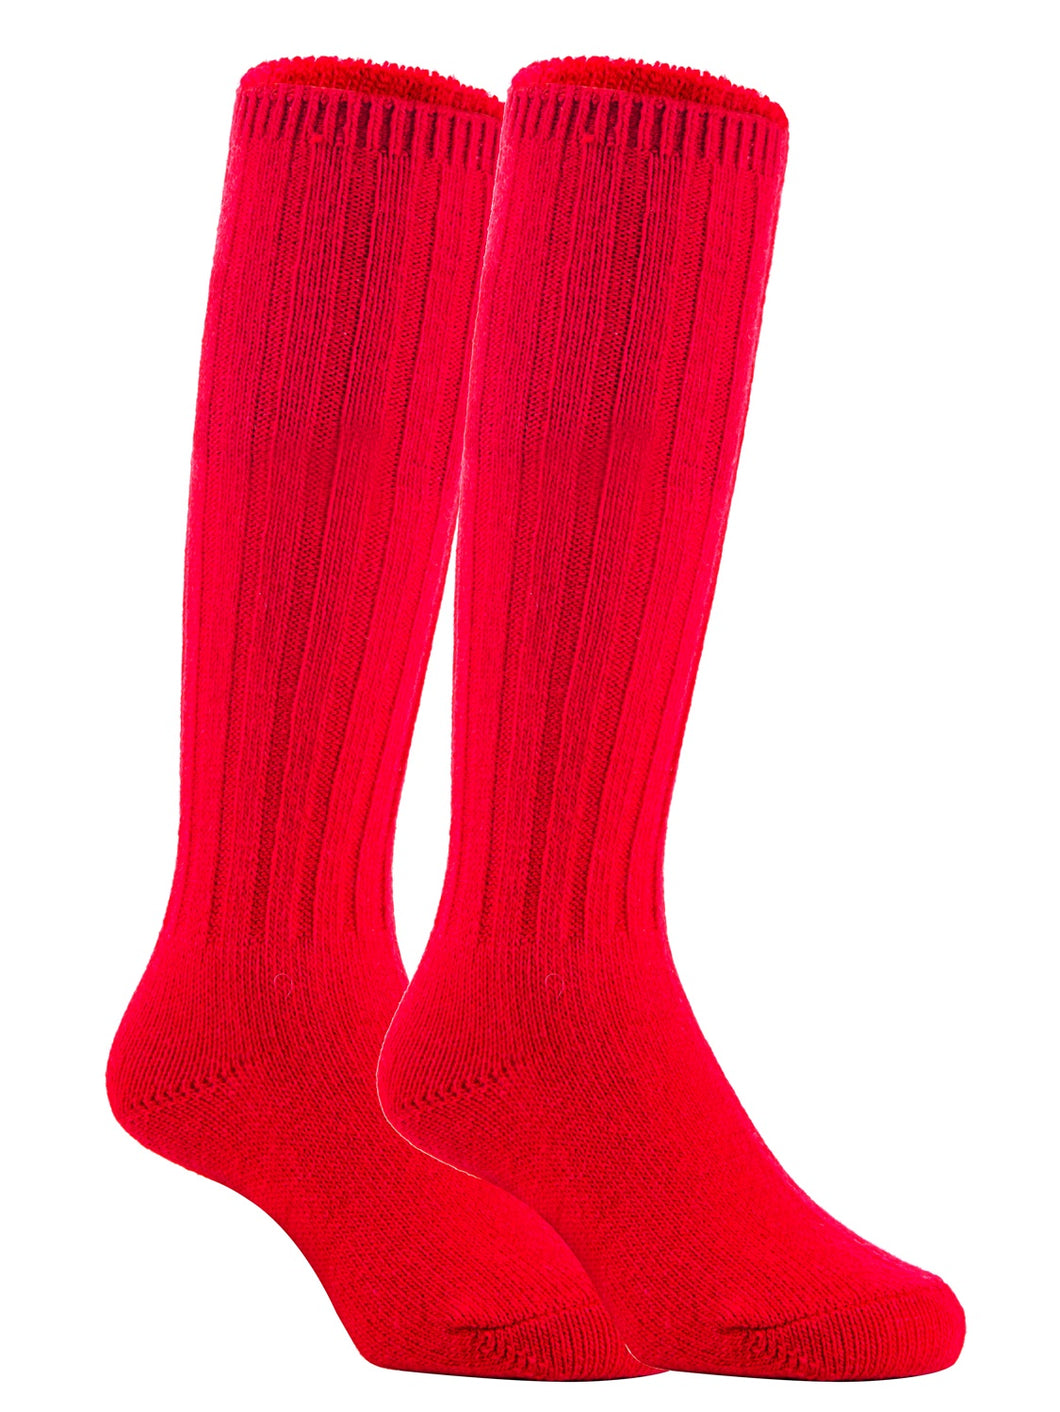 Lian Style Unisex Baby Children 4 Pairs Knee-high Wool Boot Blend Boot Socks Size 4-6Y(Red)